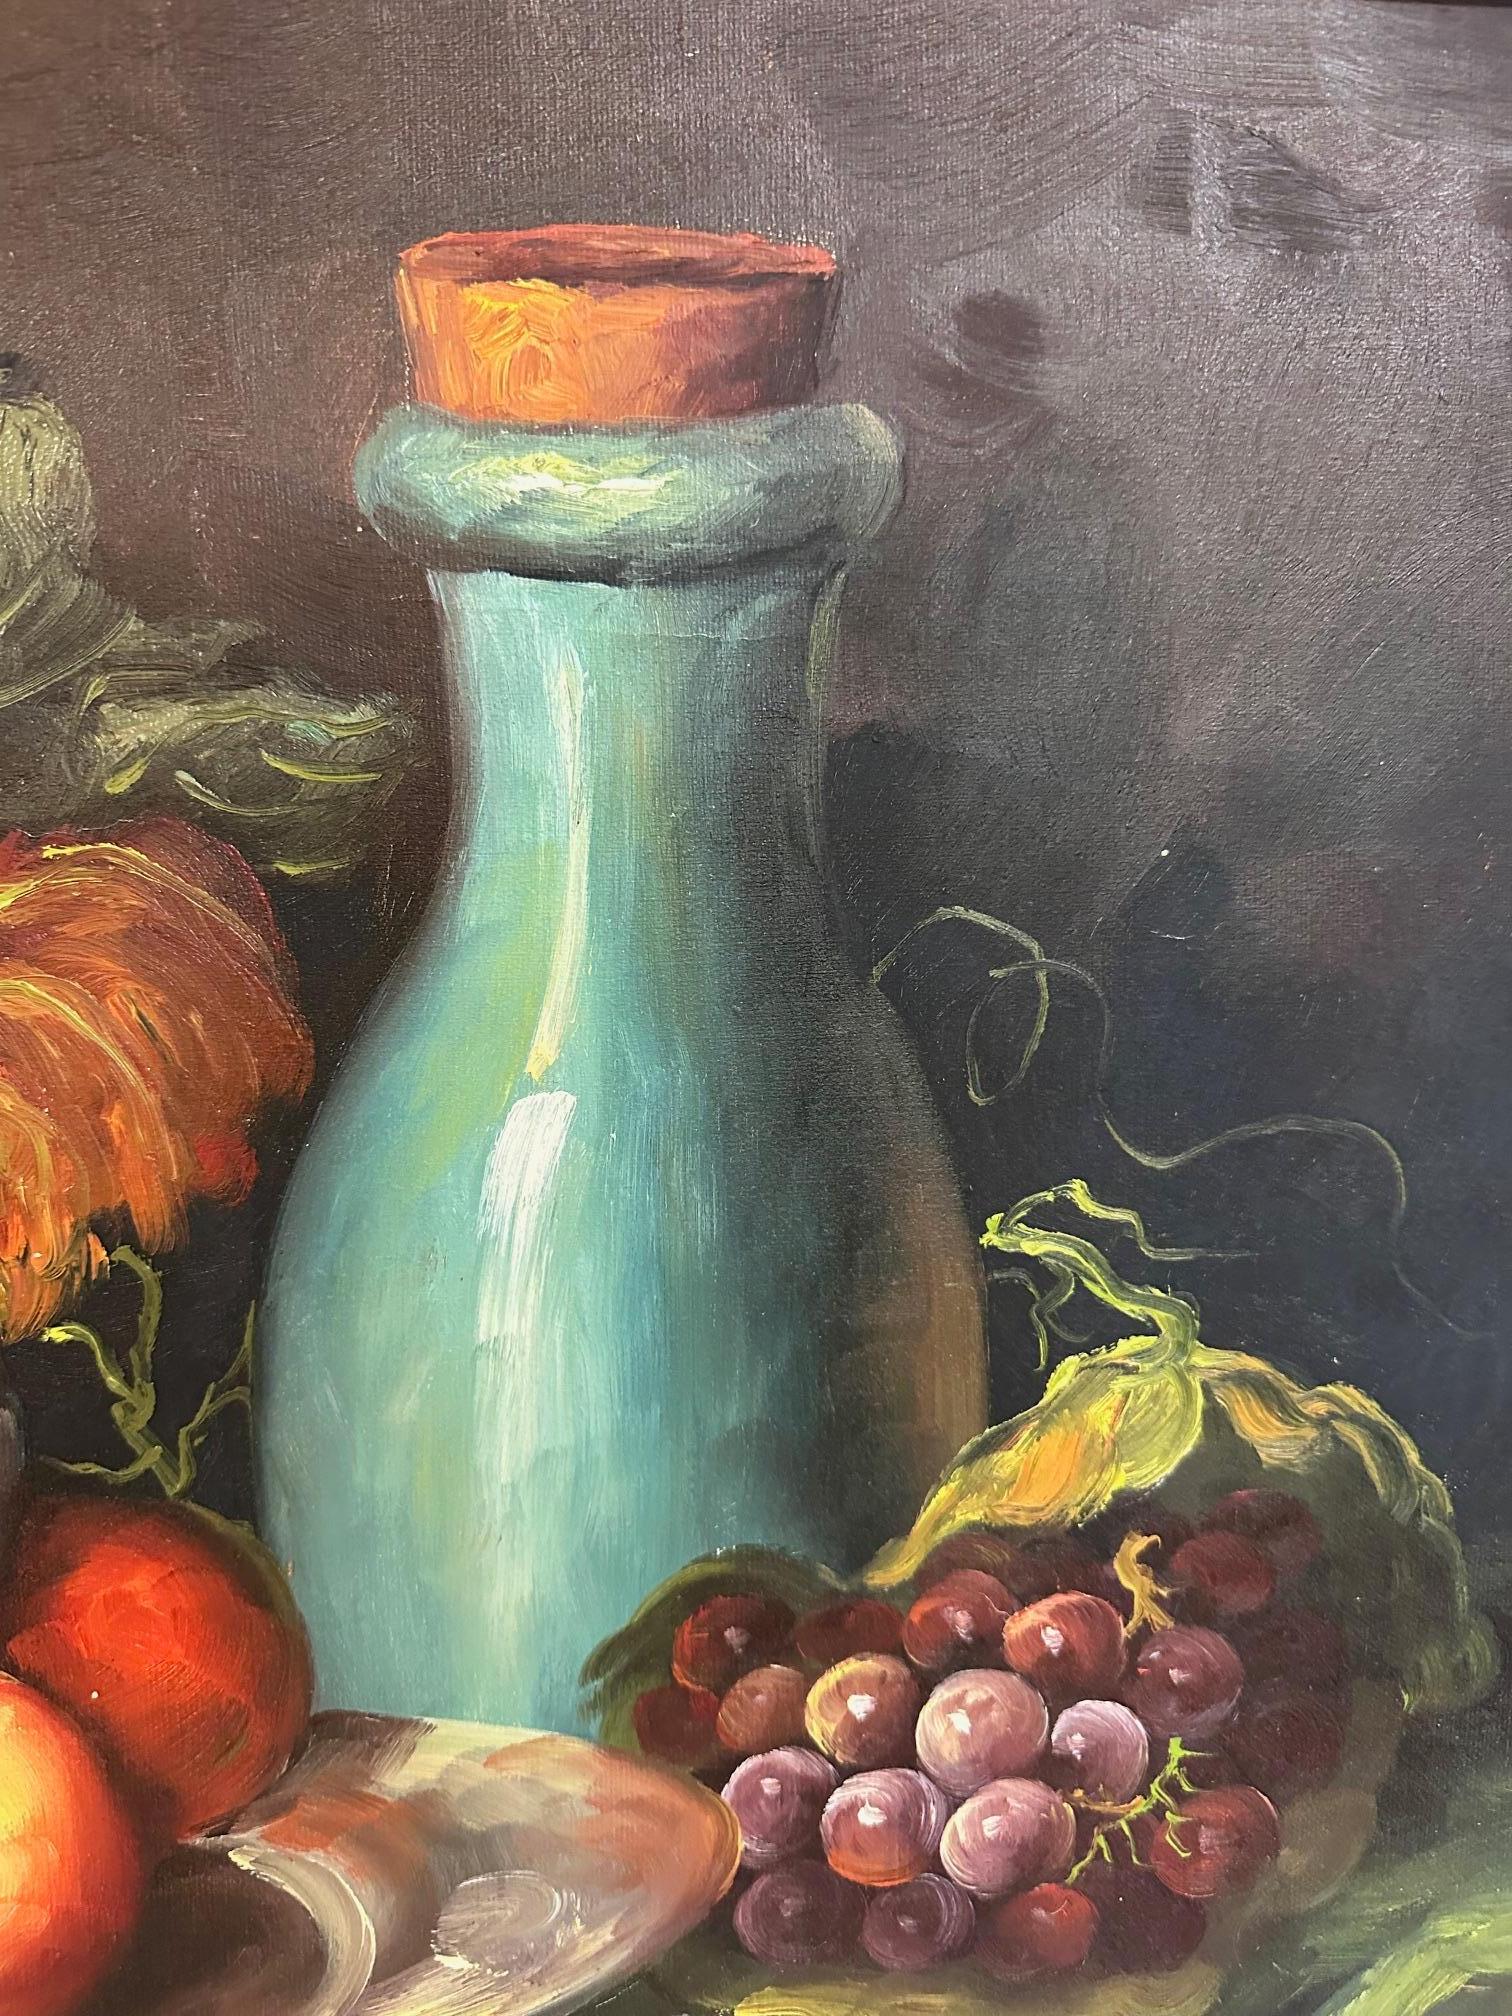 Eye catching well rendered tabletop still life signed Andre, having glistening turquoise jug and juicy fruit in the composition.  Canvas 24” W x 20” H